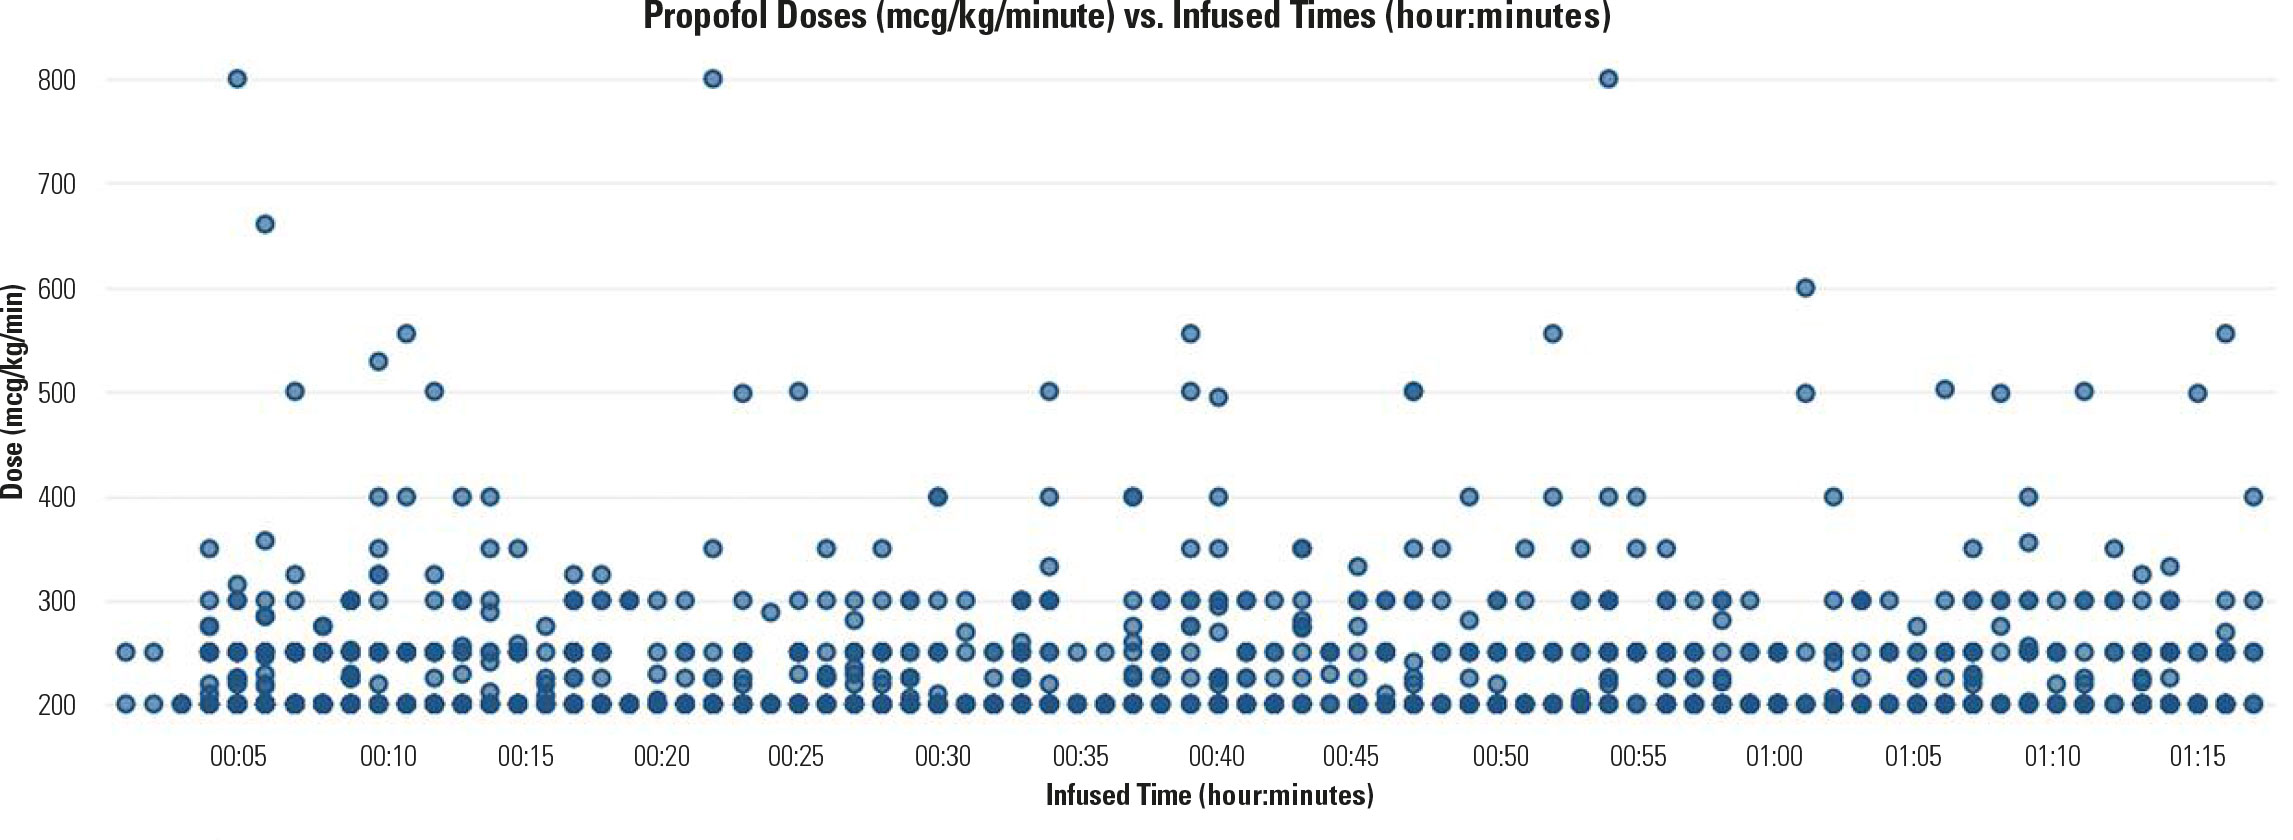 Figure 1. Propofol doses programmed at or above 200 mcg/kg/minute during 2019 (N=16 hospitals)